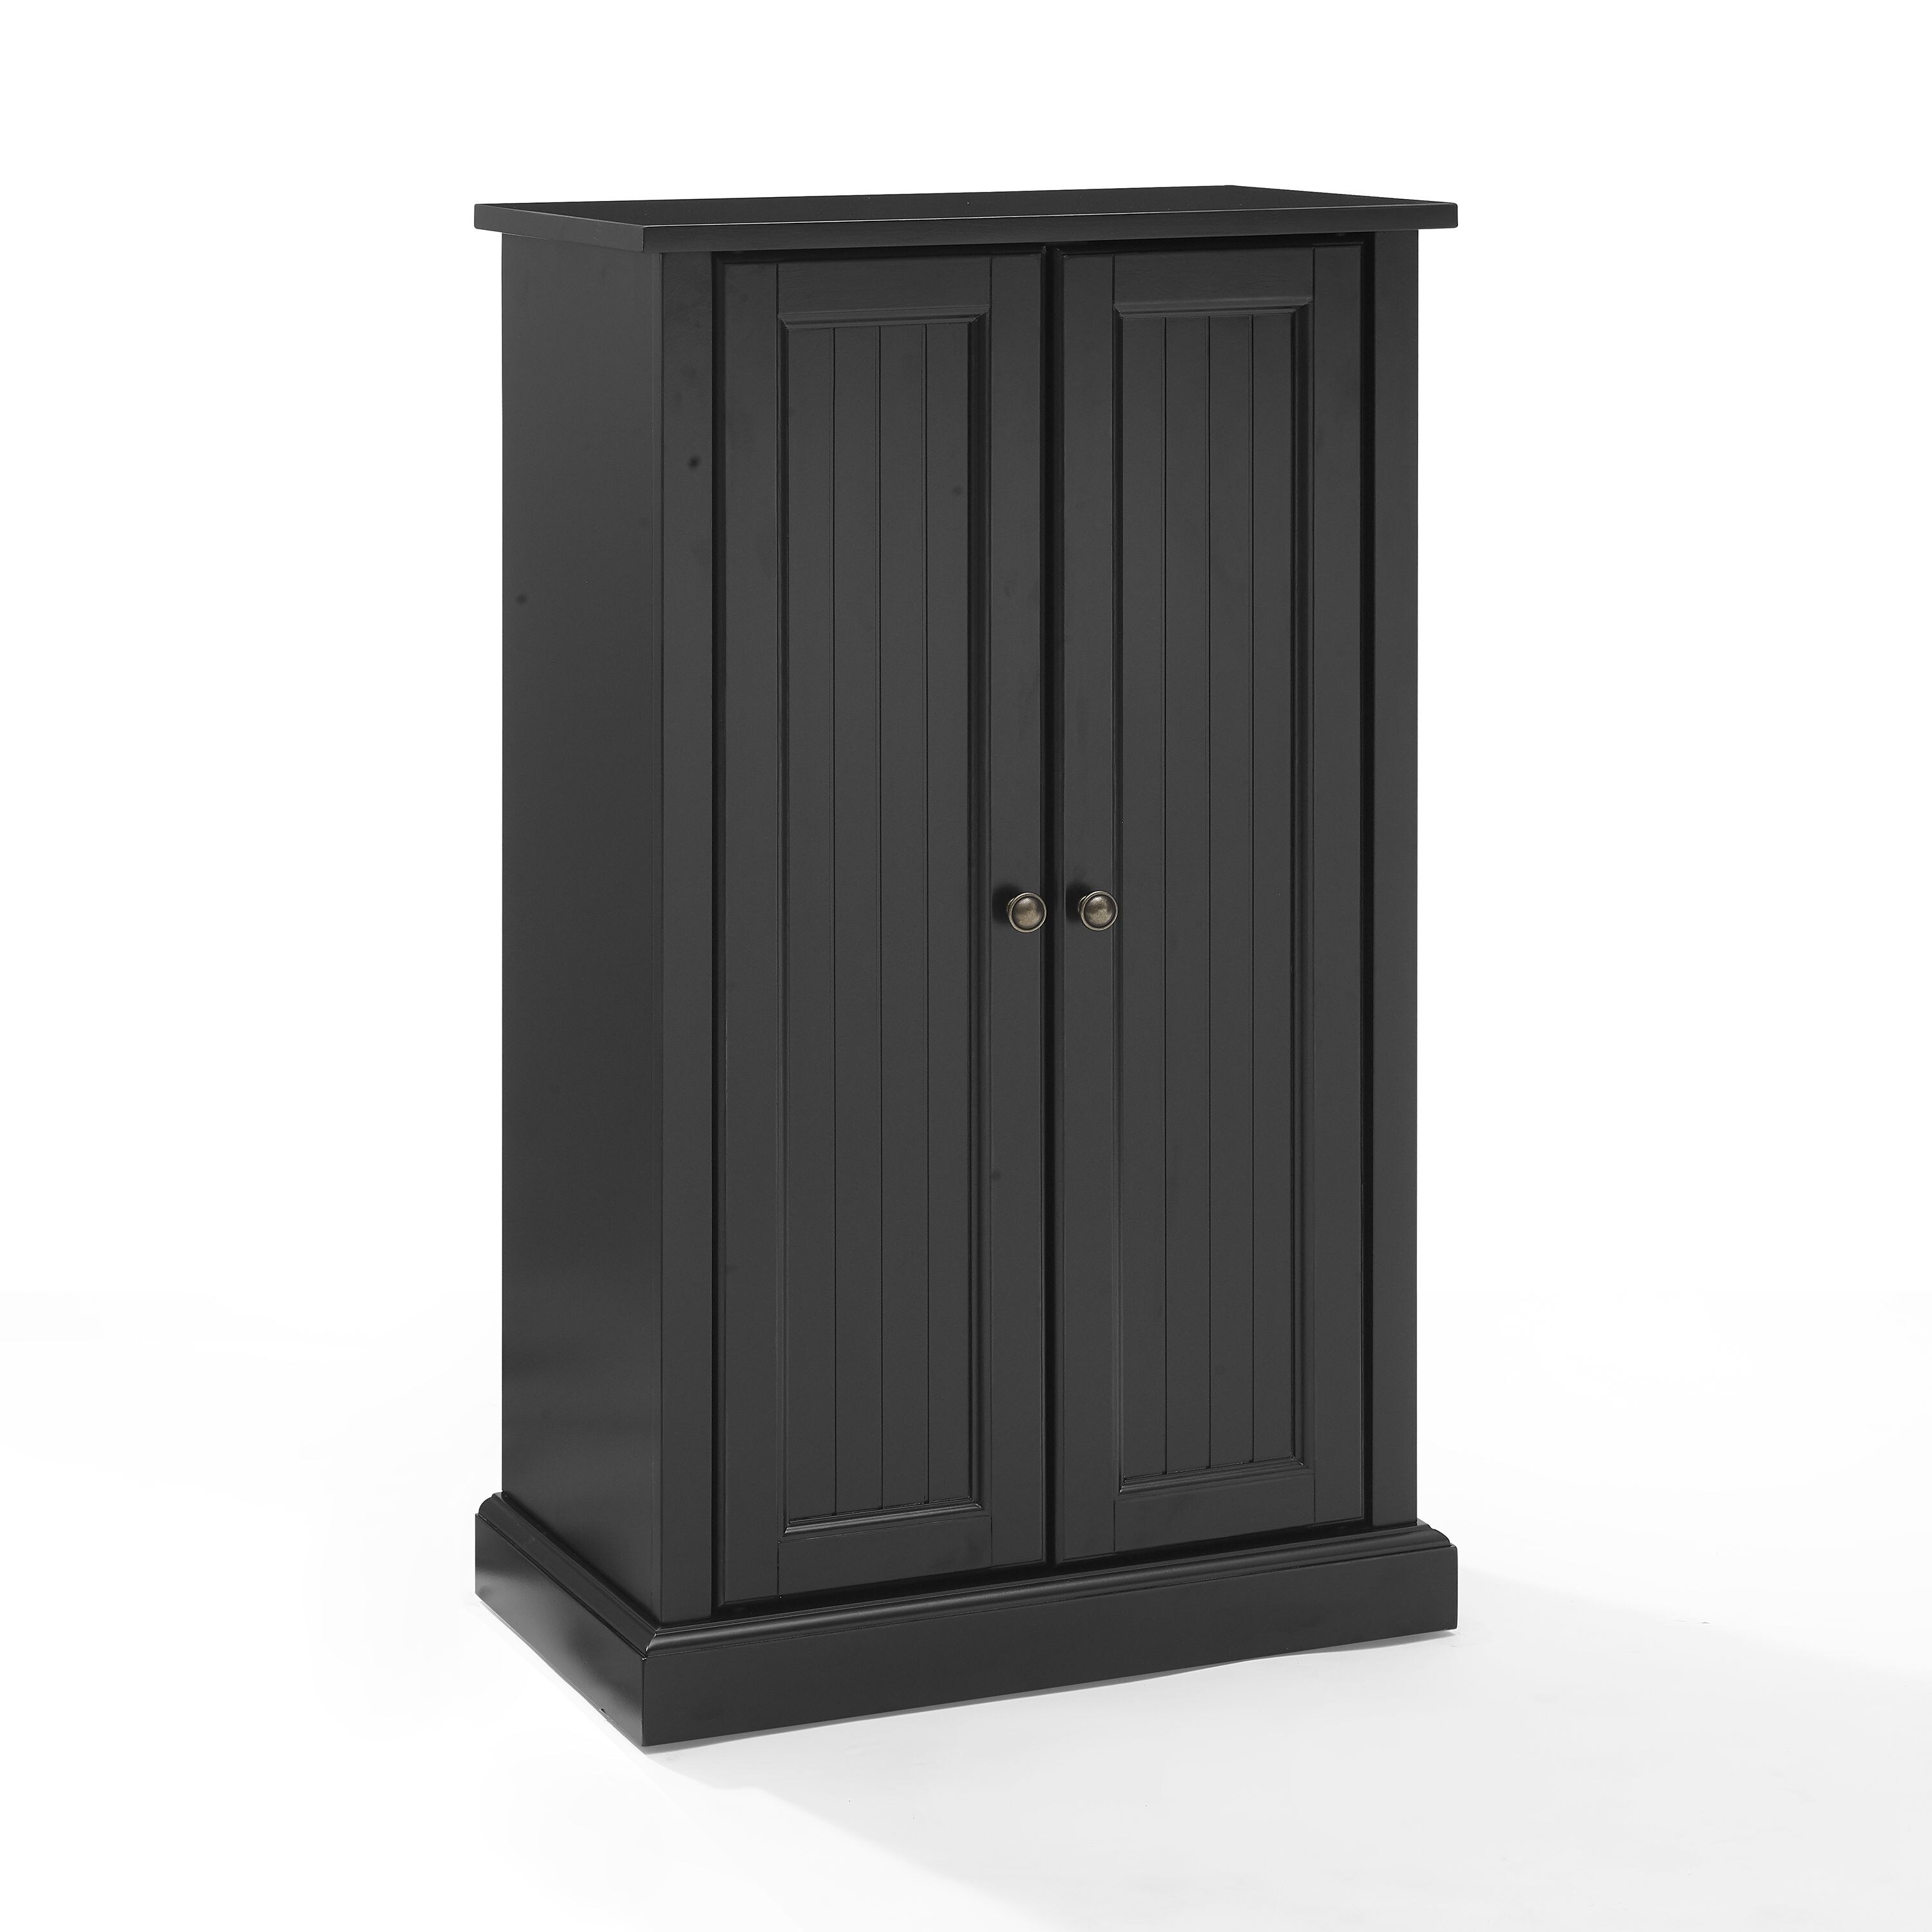 Black Kitchen Cabinetry at Lowes.com